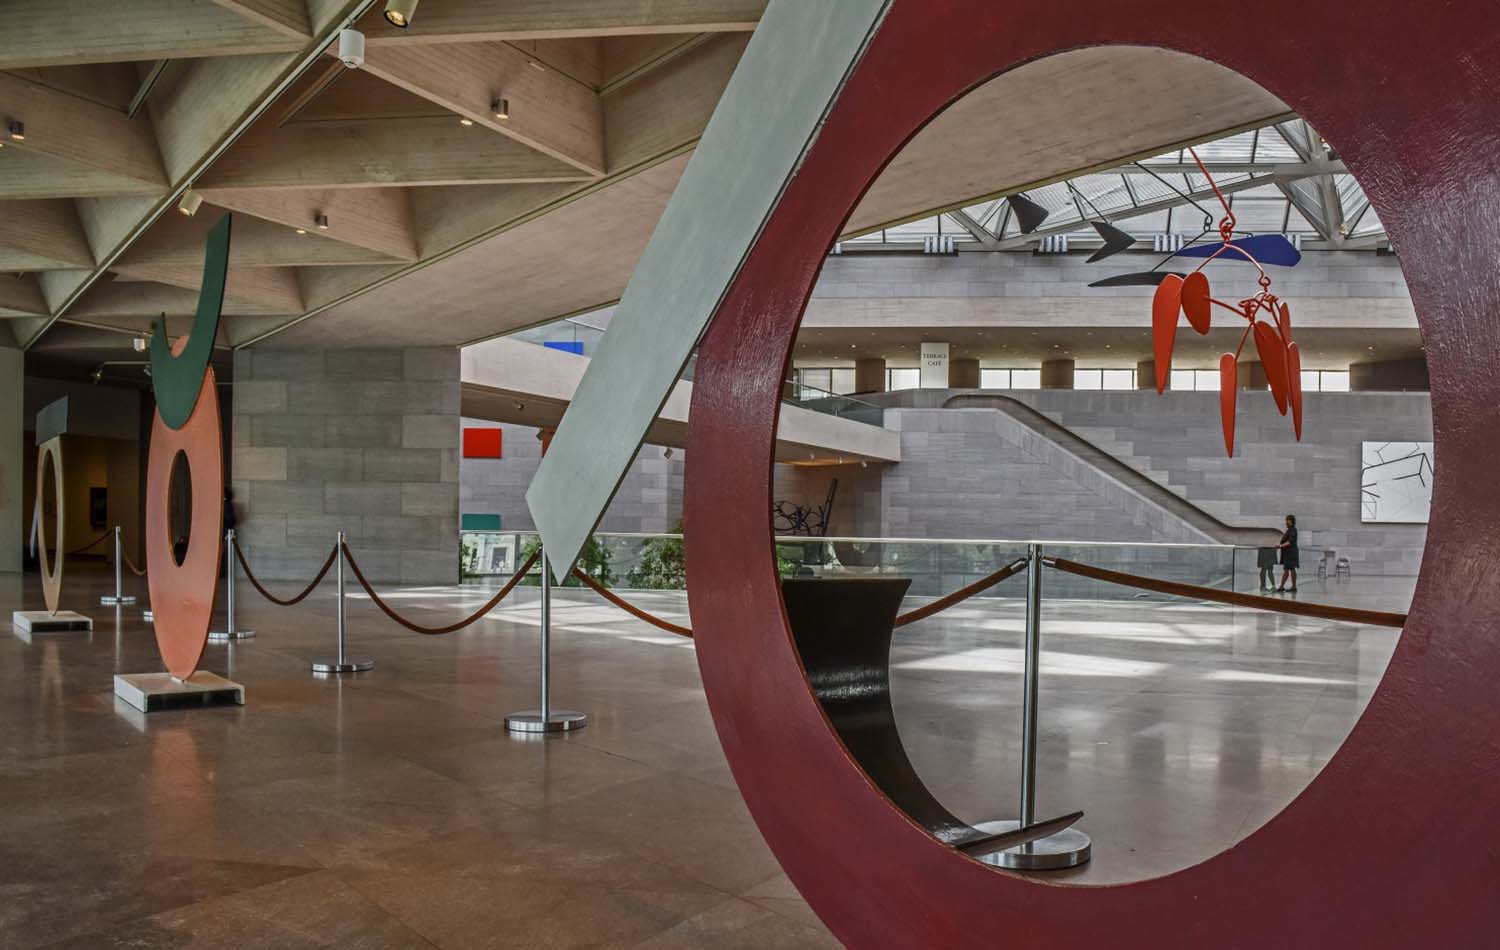  A trio of David Smith sculptures — Circle I, Circle III and Circle II — in the north window of the ground floor of the renovated museum. (Bill O'Leary/The Washington Post) 